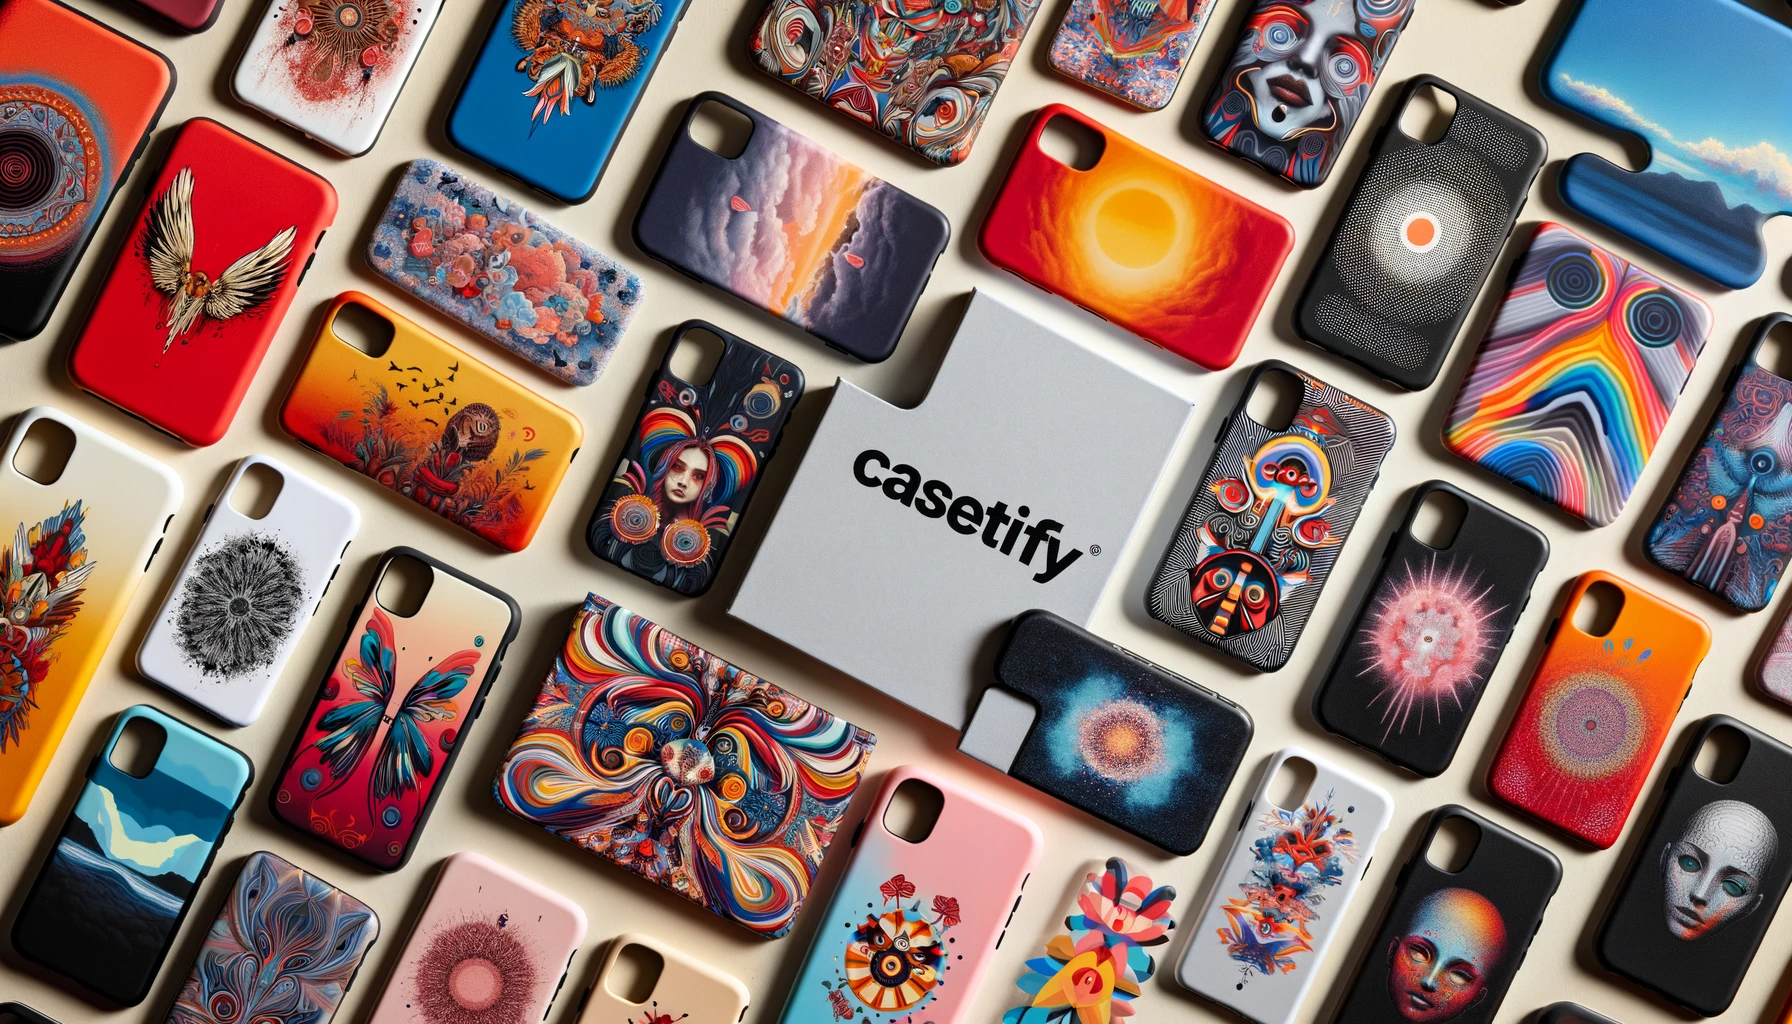 A collage showcasing the popular designs of CASETiFY phone cases. Various colorful and stylish phone cases arranged artistically with a central focus on the word 'CASETiFY'.